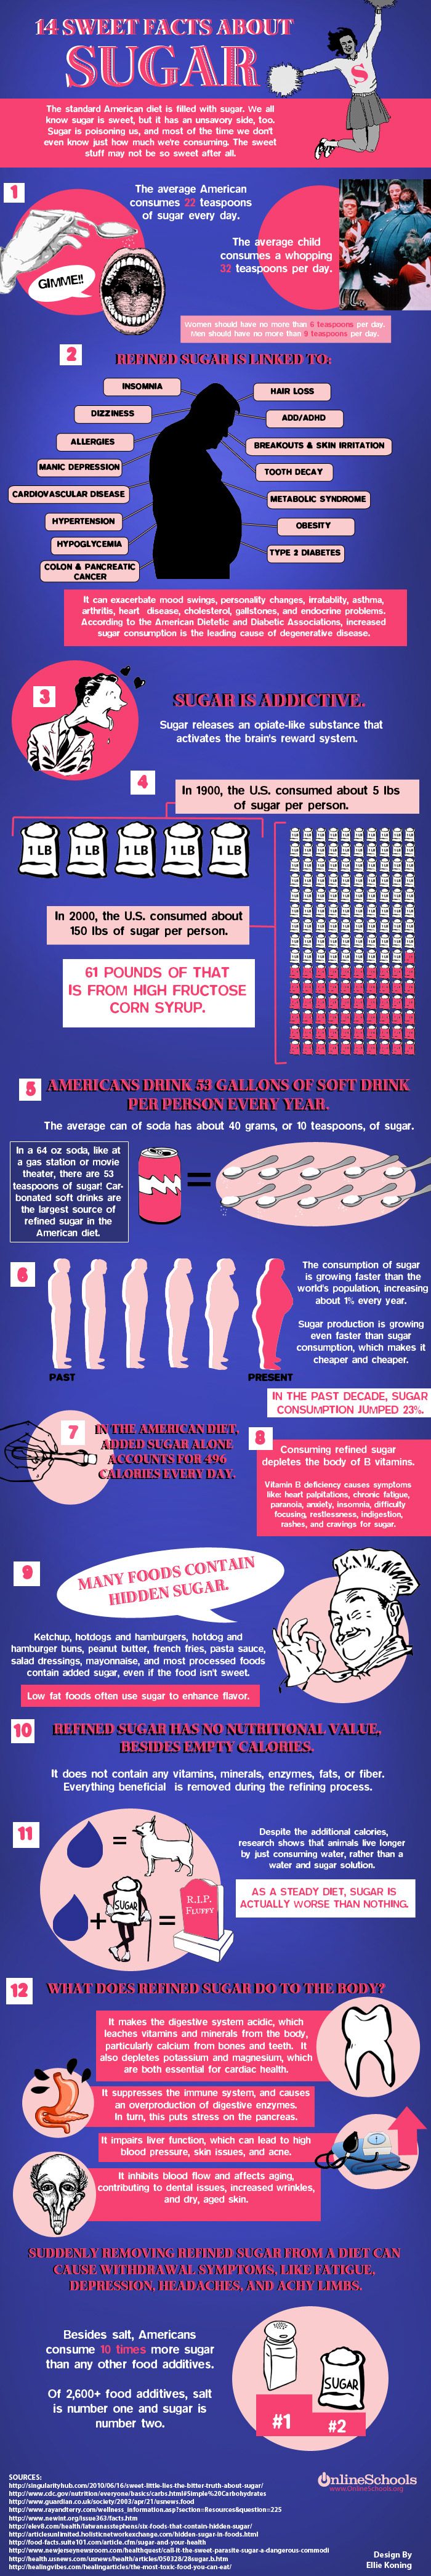 Facts about Sugar (infographic)